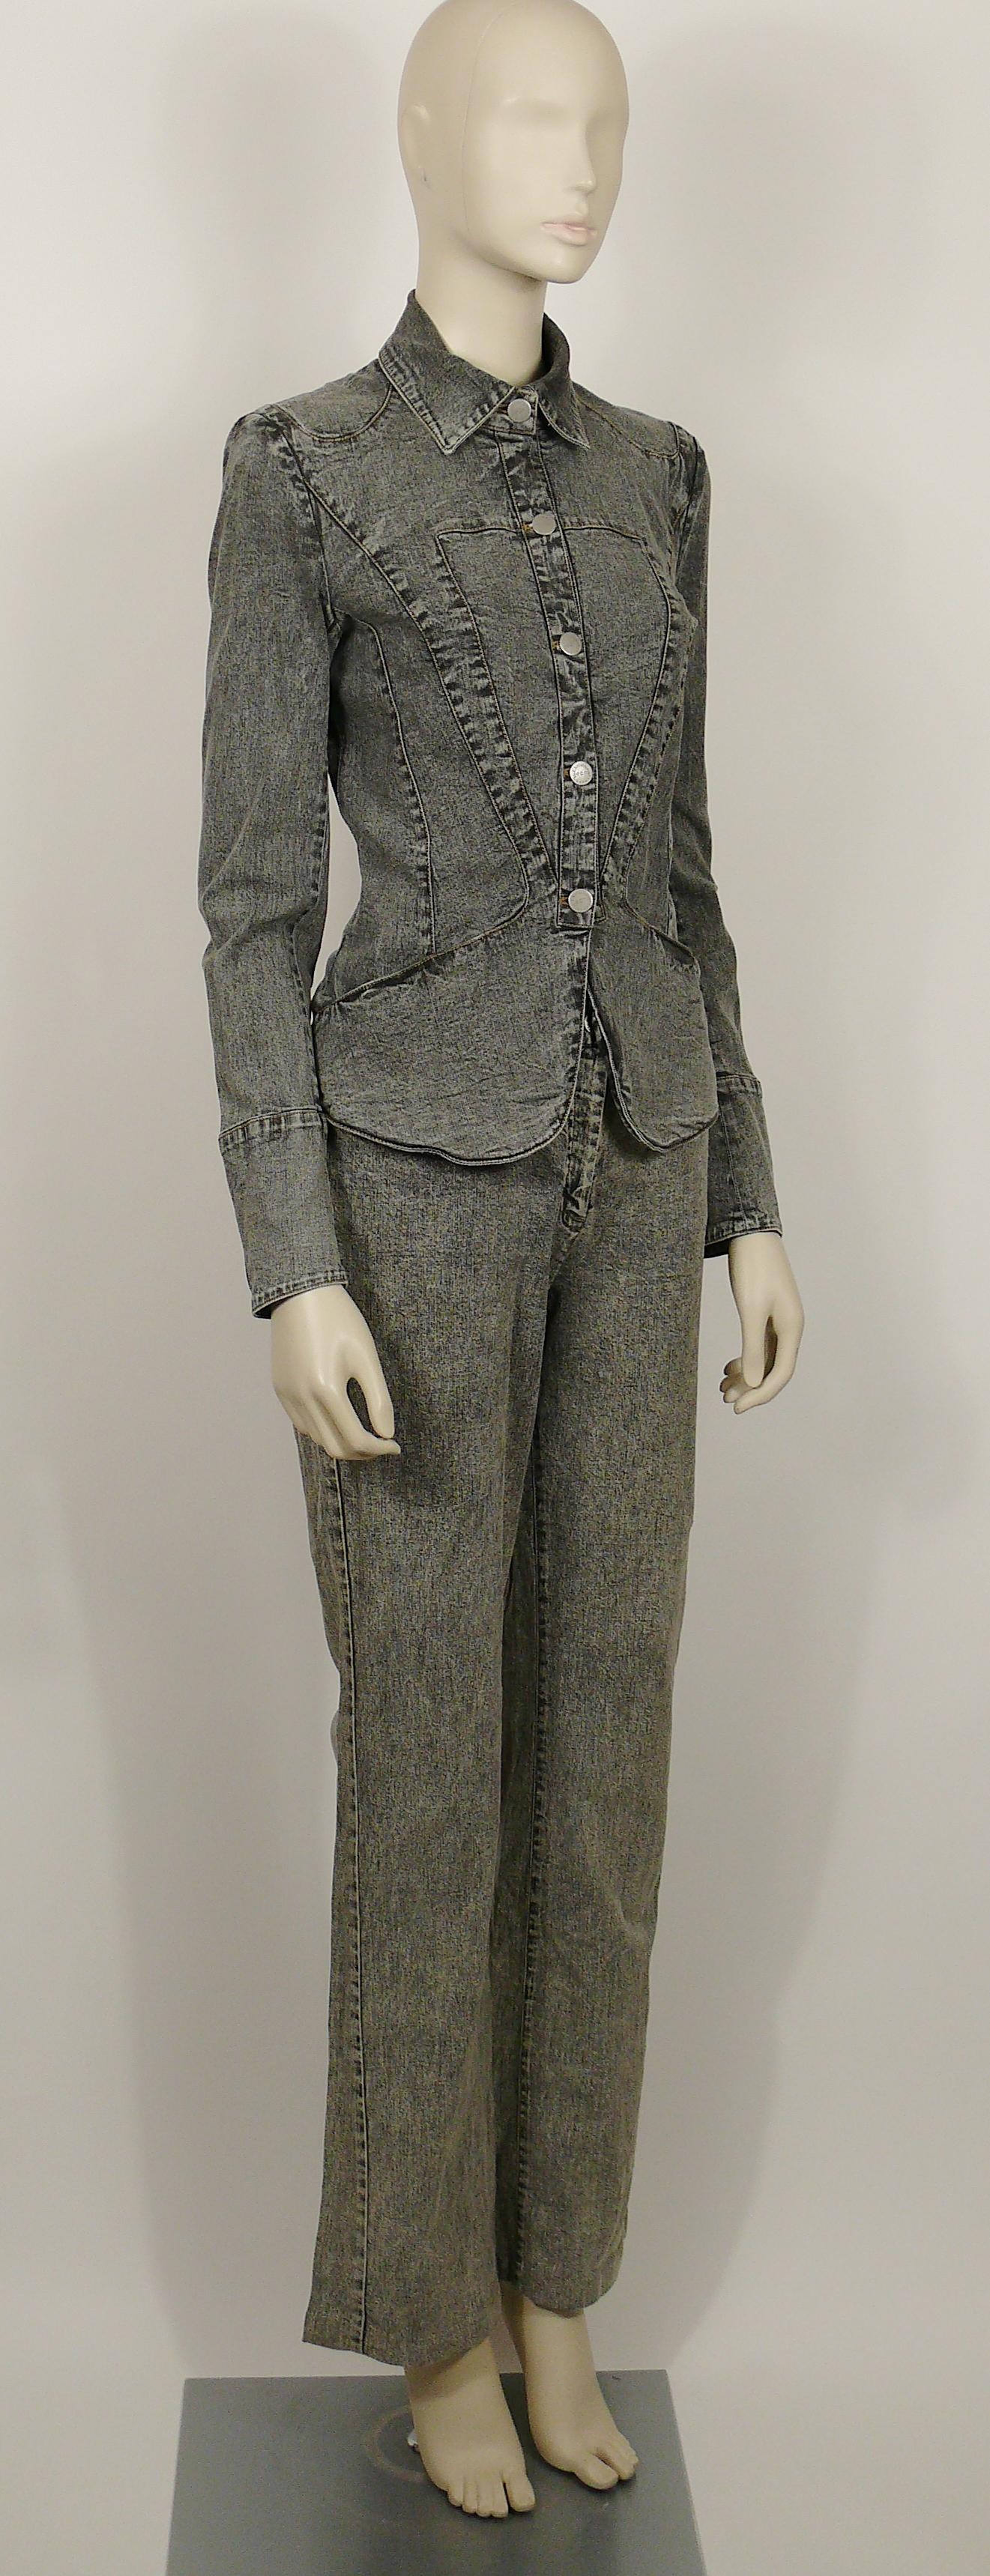 CHRISTIAN LACROIX JEANS vintage grey distressed denim jacket and trousers featuring amazing embroidered hearts.

The jacket features :
- Grey distressed denim featuring a large embroidered and jewelled heart at the back.
- Classic collar.
- Long